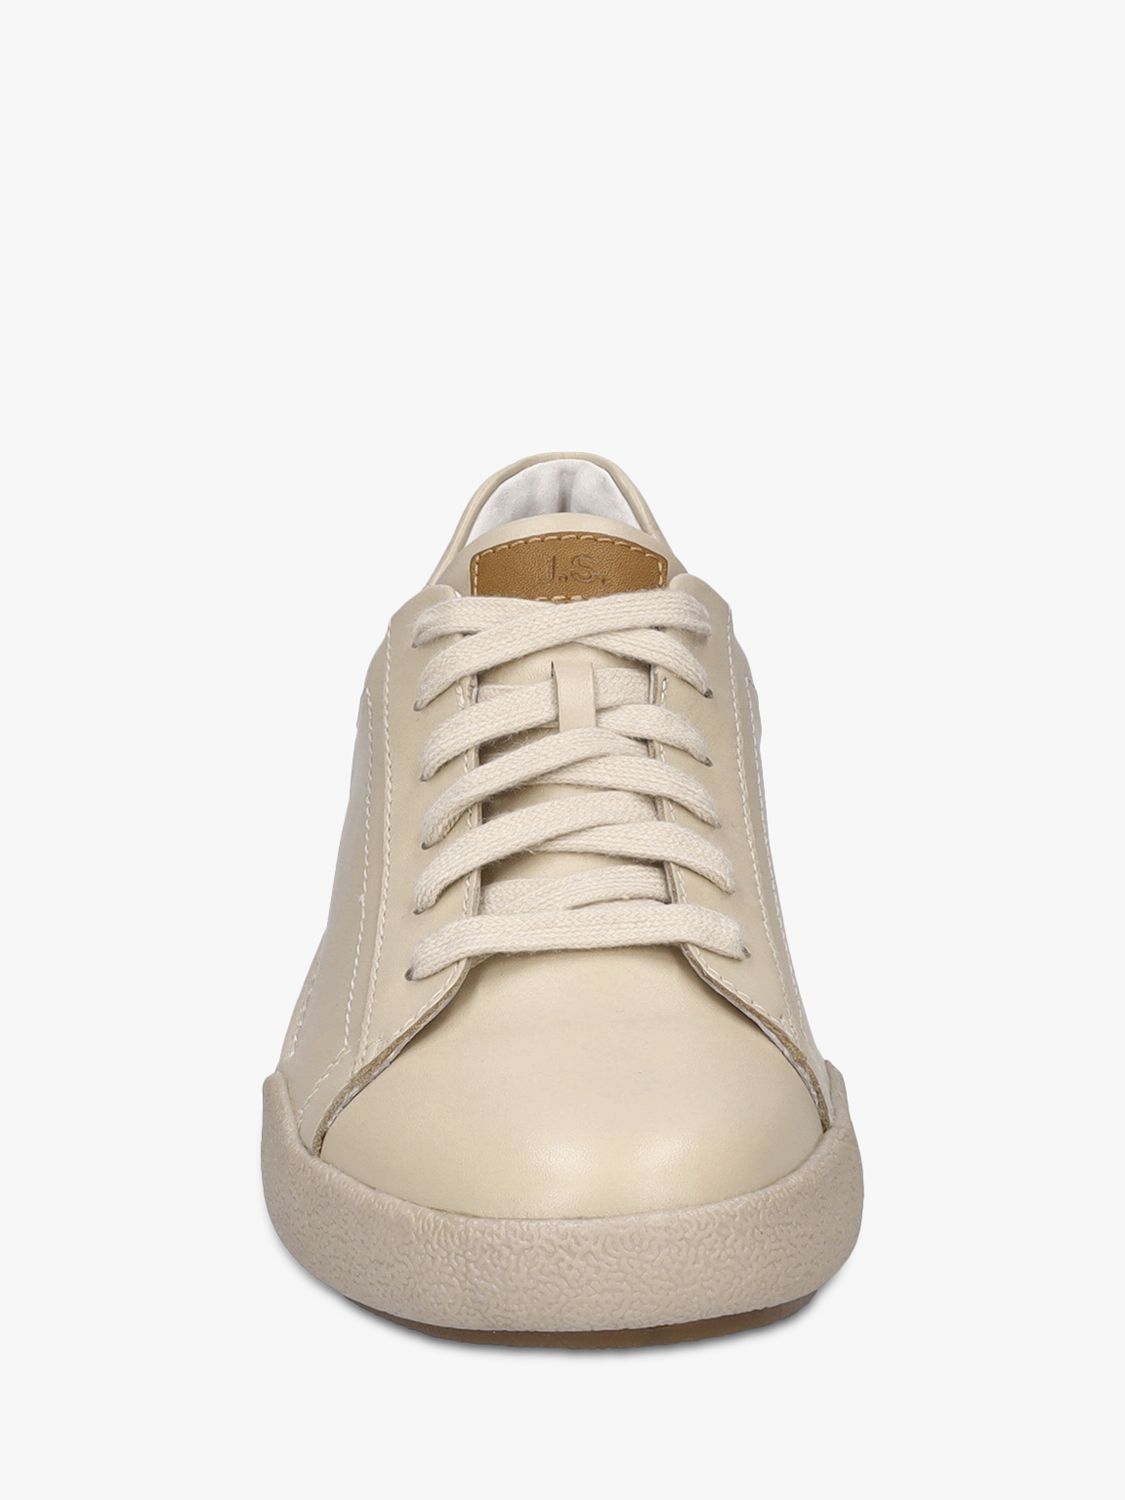 Buy Josef Seibel Claire 01 Leather Trainers, Sand Online at johnlewis.com